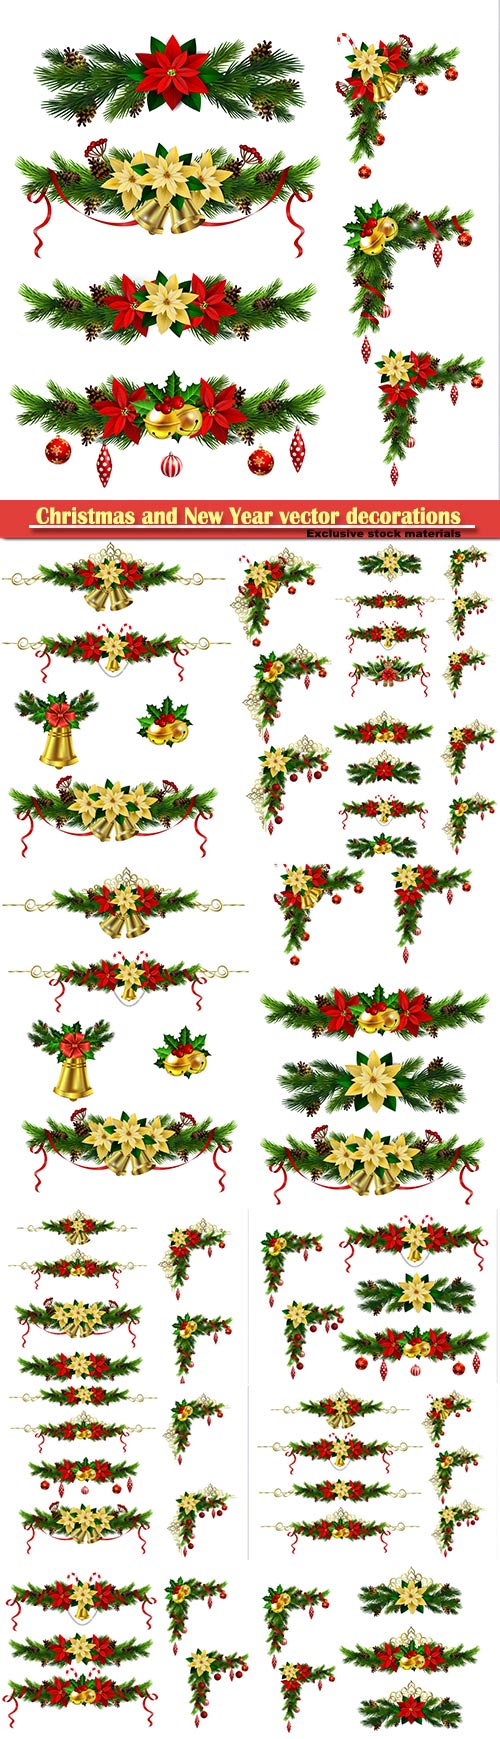 Christmas and New Year vector decorations with fir branches, red ribbons and bells